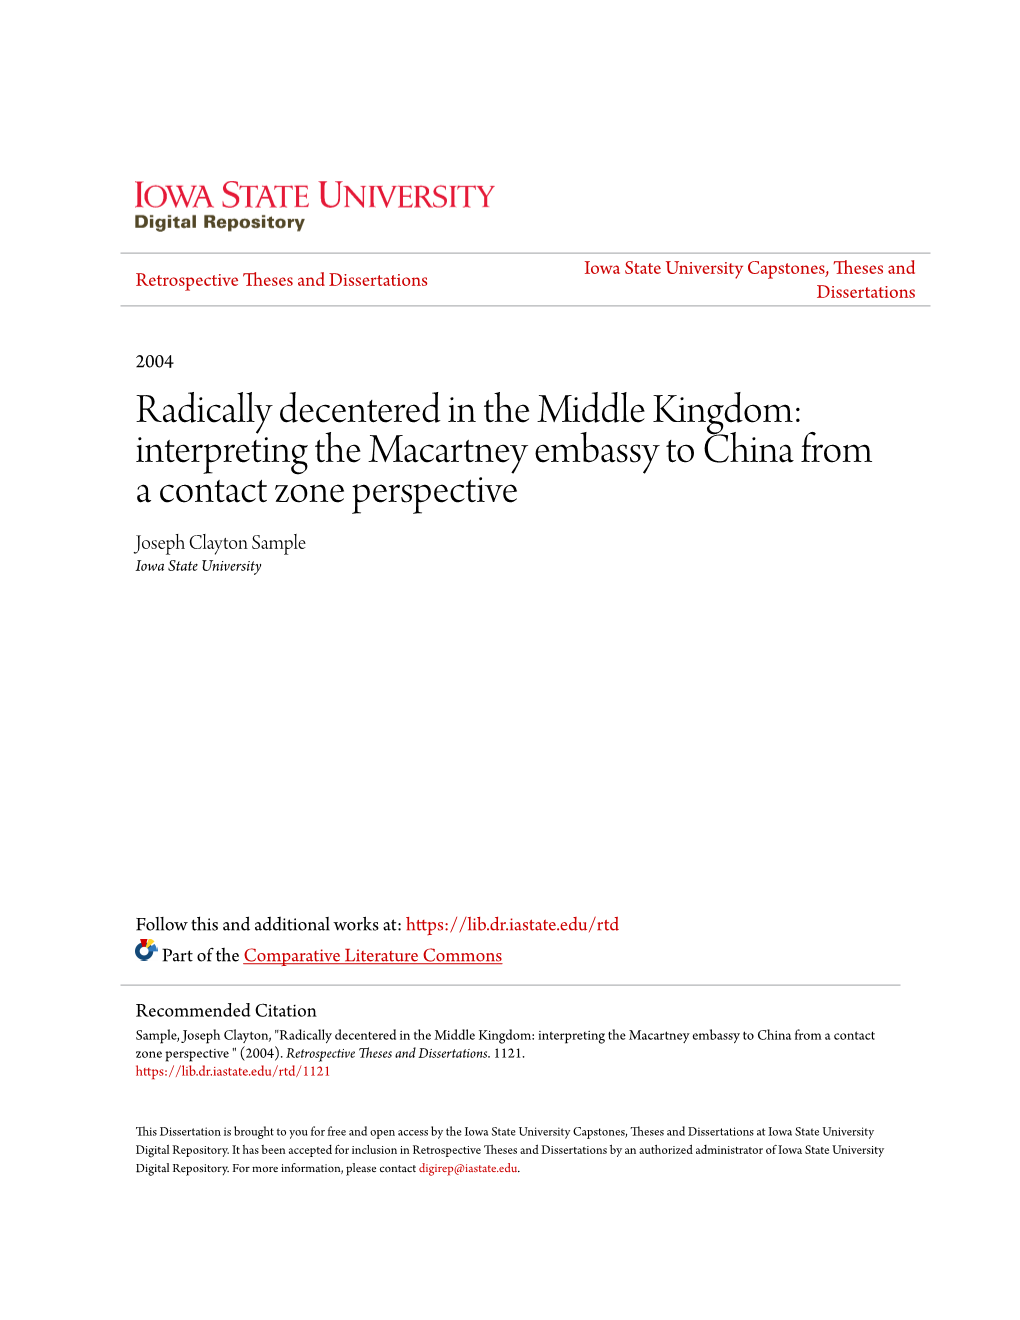 Interpreting the Macartney Embassy to China from a Contact Zone Perspective Joseph Clayton Sample Iowa State University